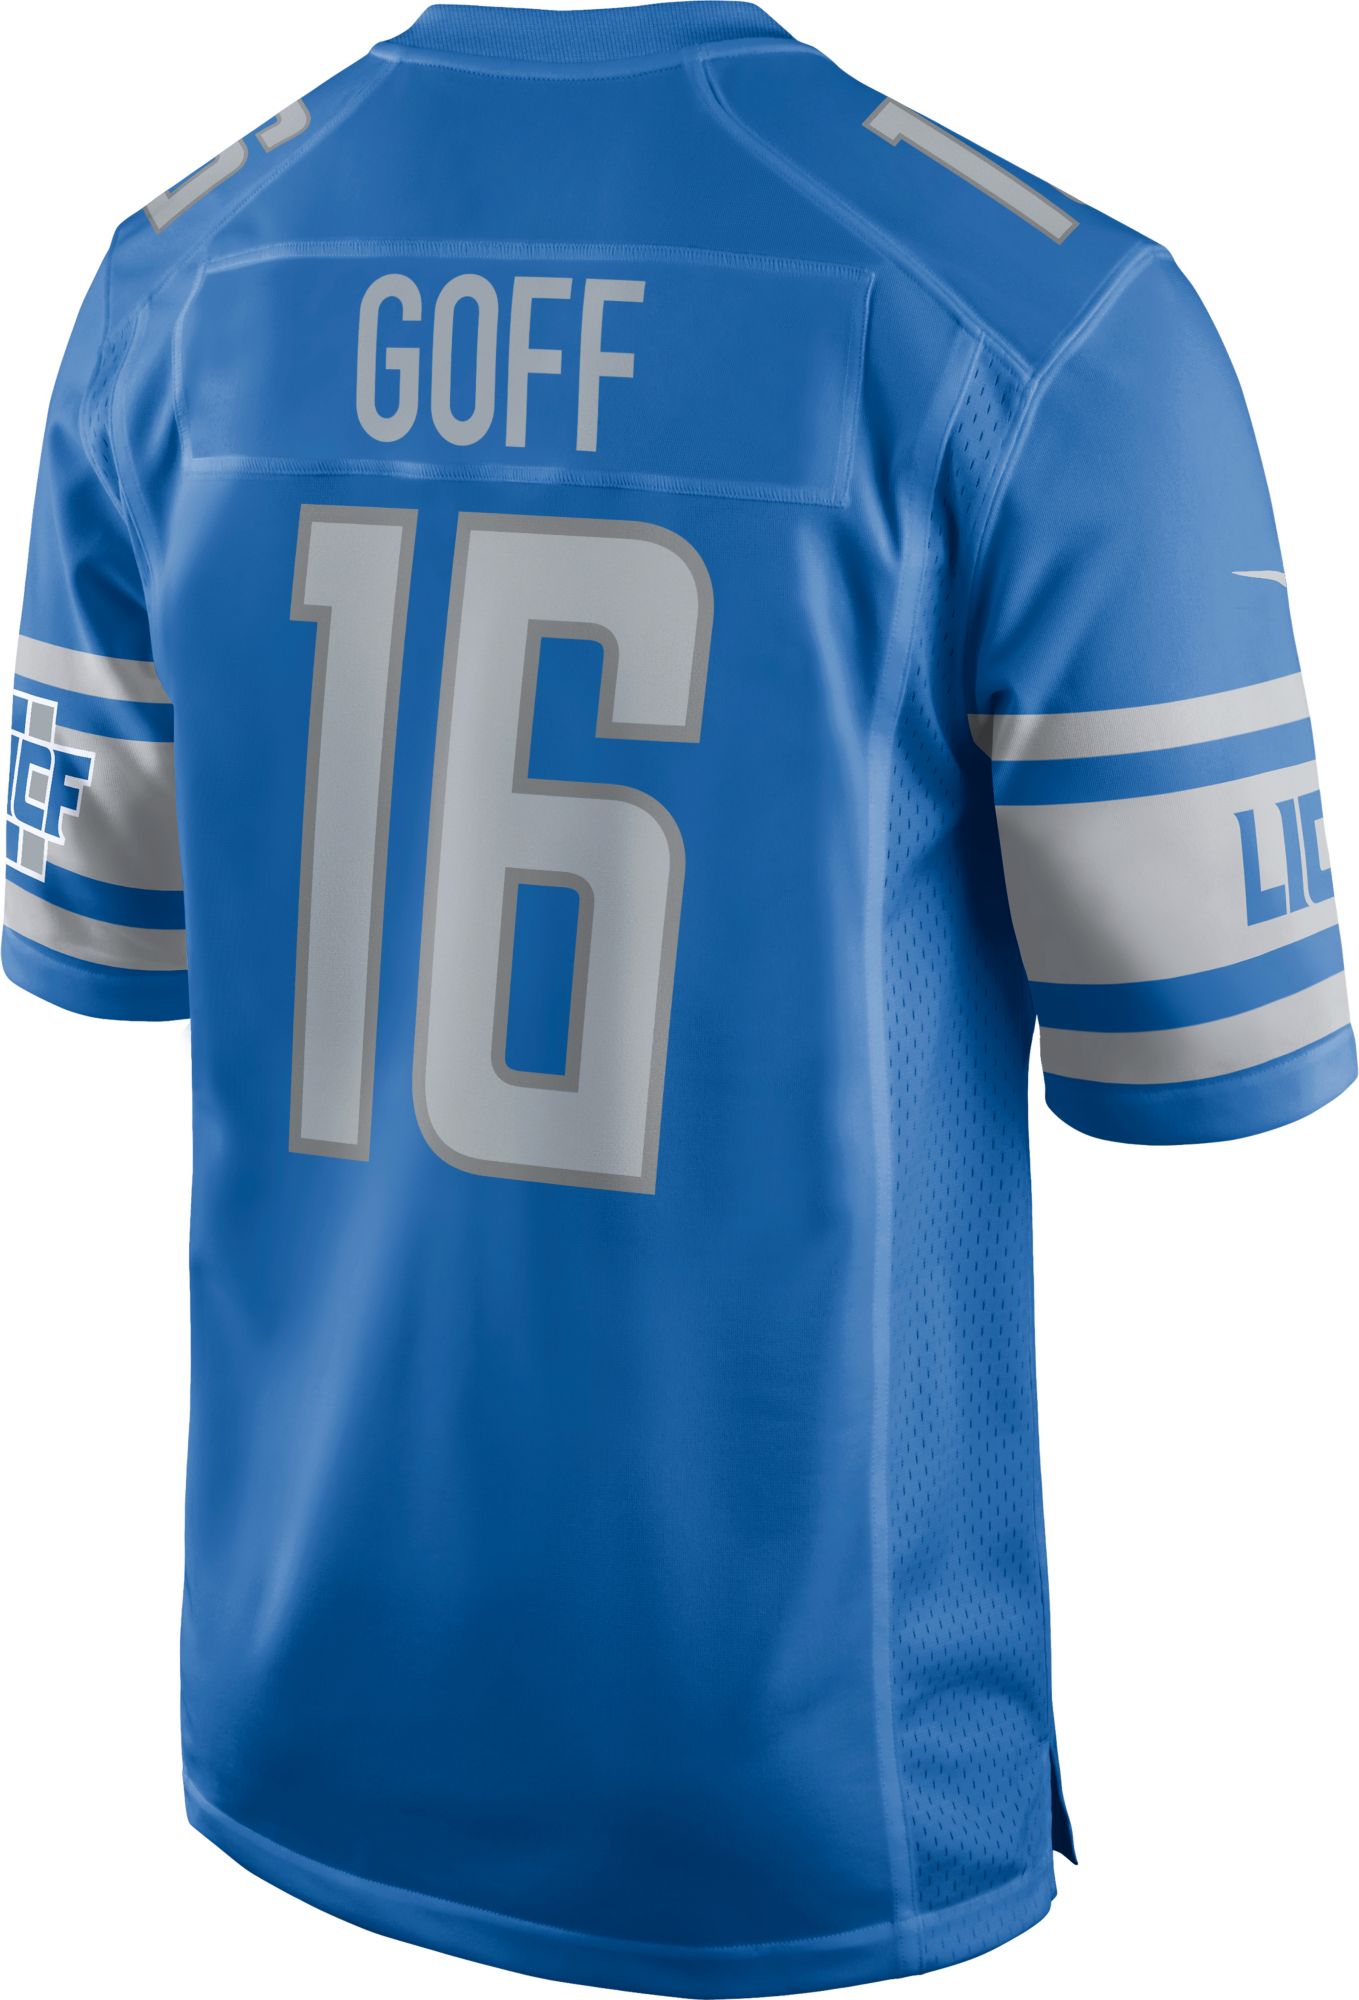 Rams No16 Jared Goff Men's Nike Multi-Color 2020 Crucial Catch Jersey Greyheather